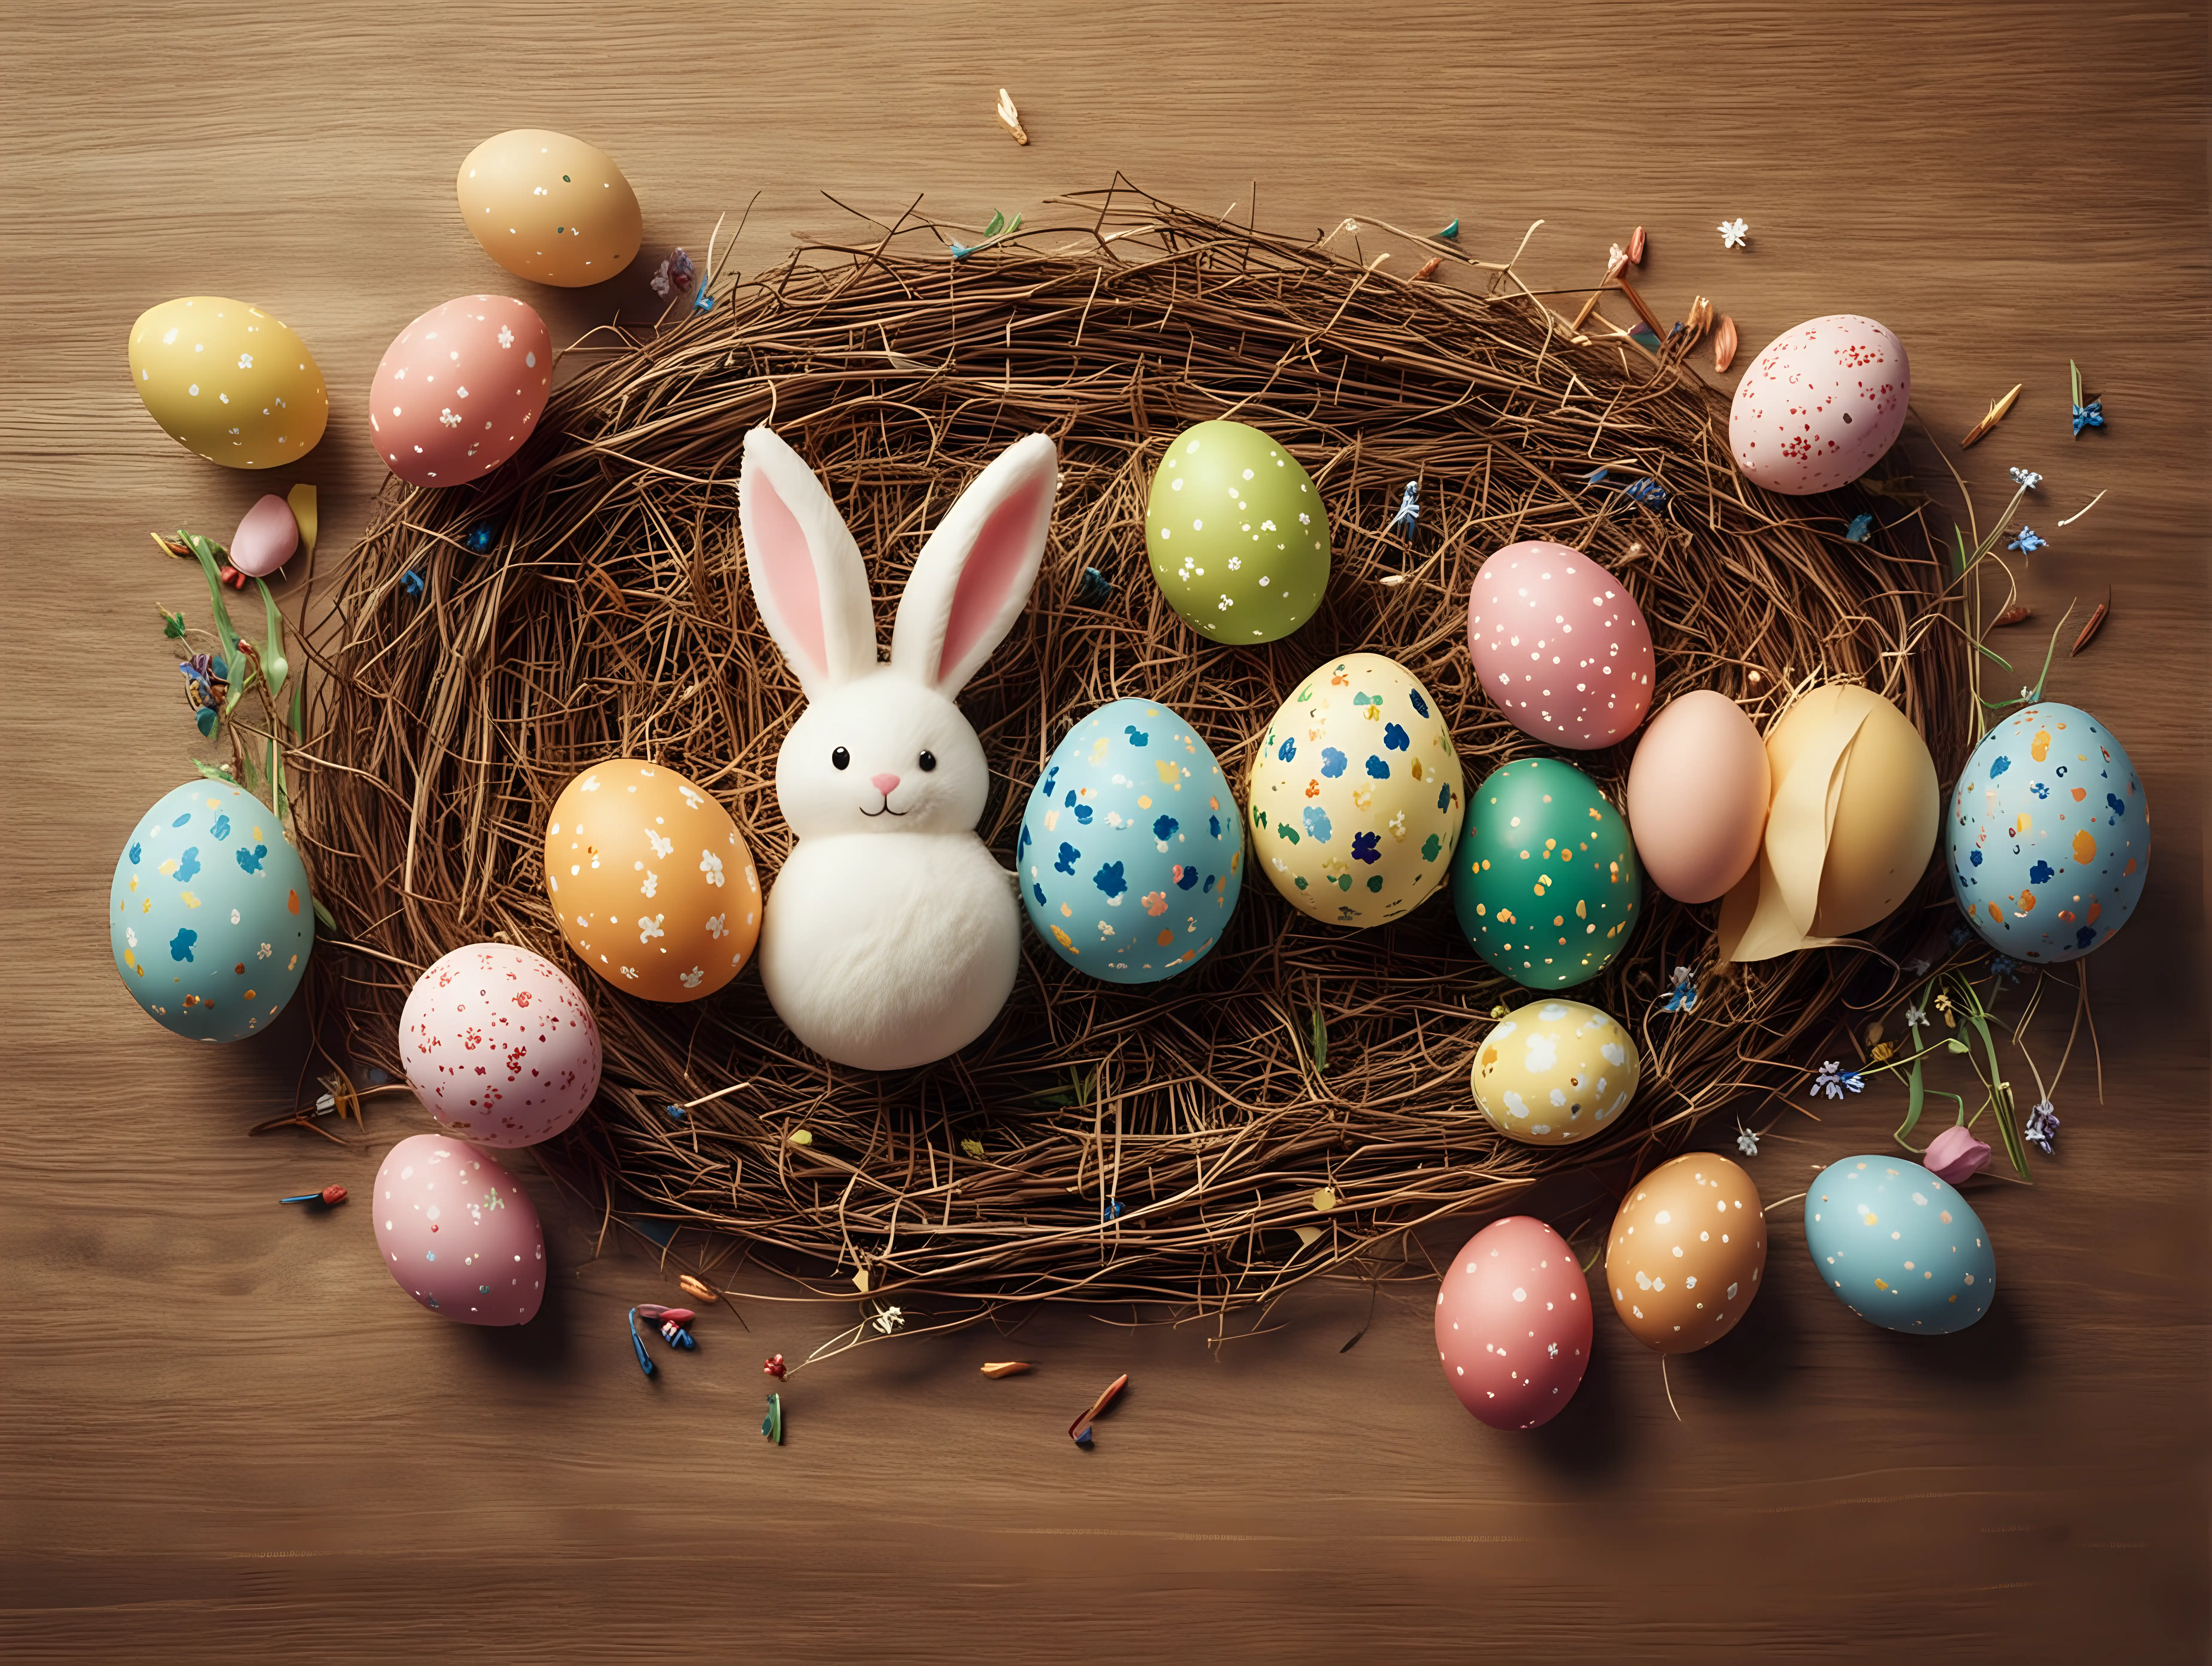 Create an image that reflects the celebration of Easter and the pursuit of studies and education. This should be aimed at students from university.